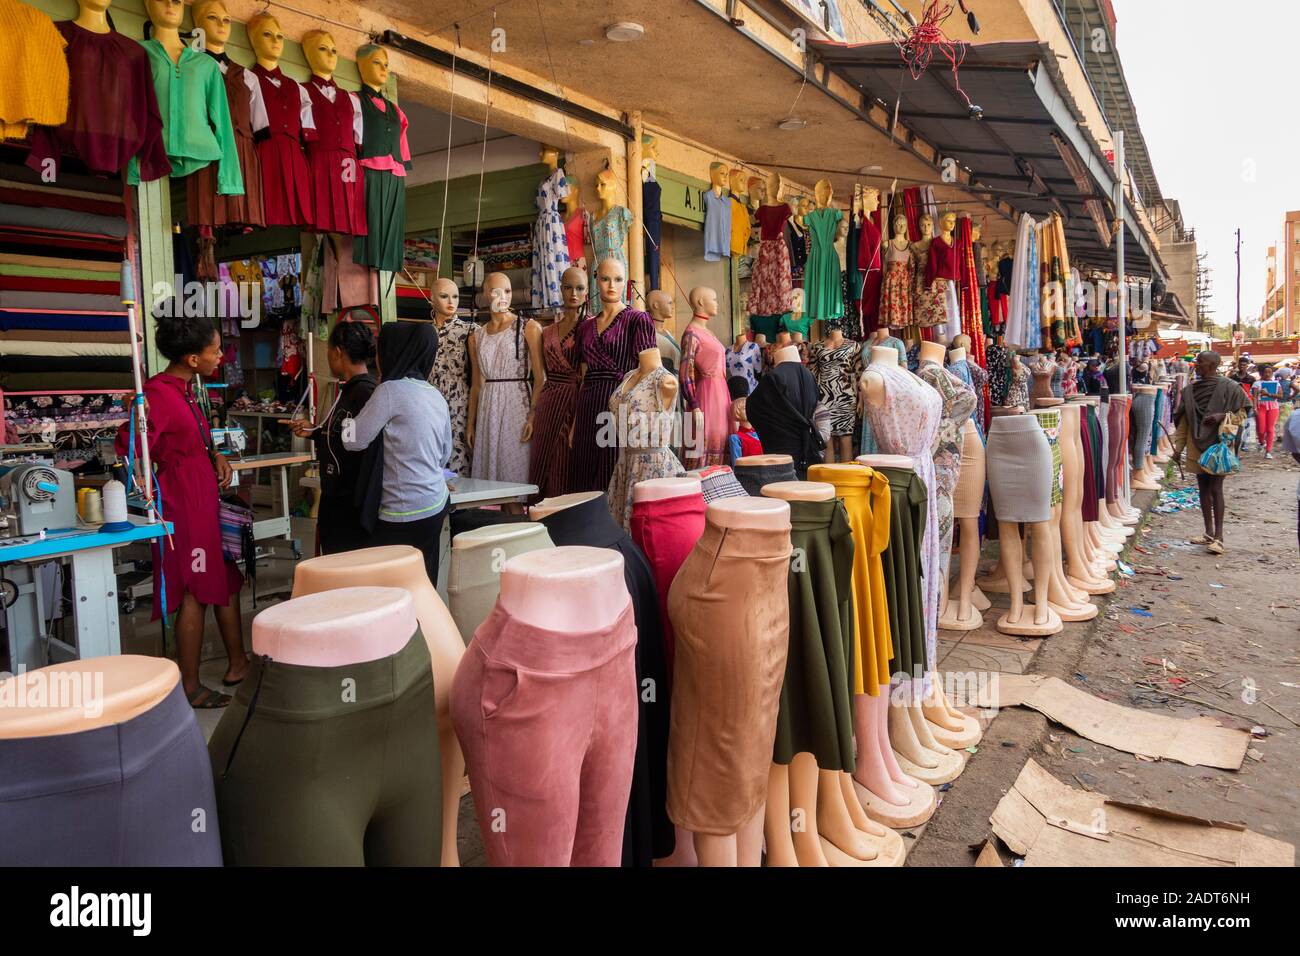 Ethiopia, Amhara Region, Bahir Dar, city centre, market, clothing shops with mannequins outside Stock Photo